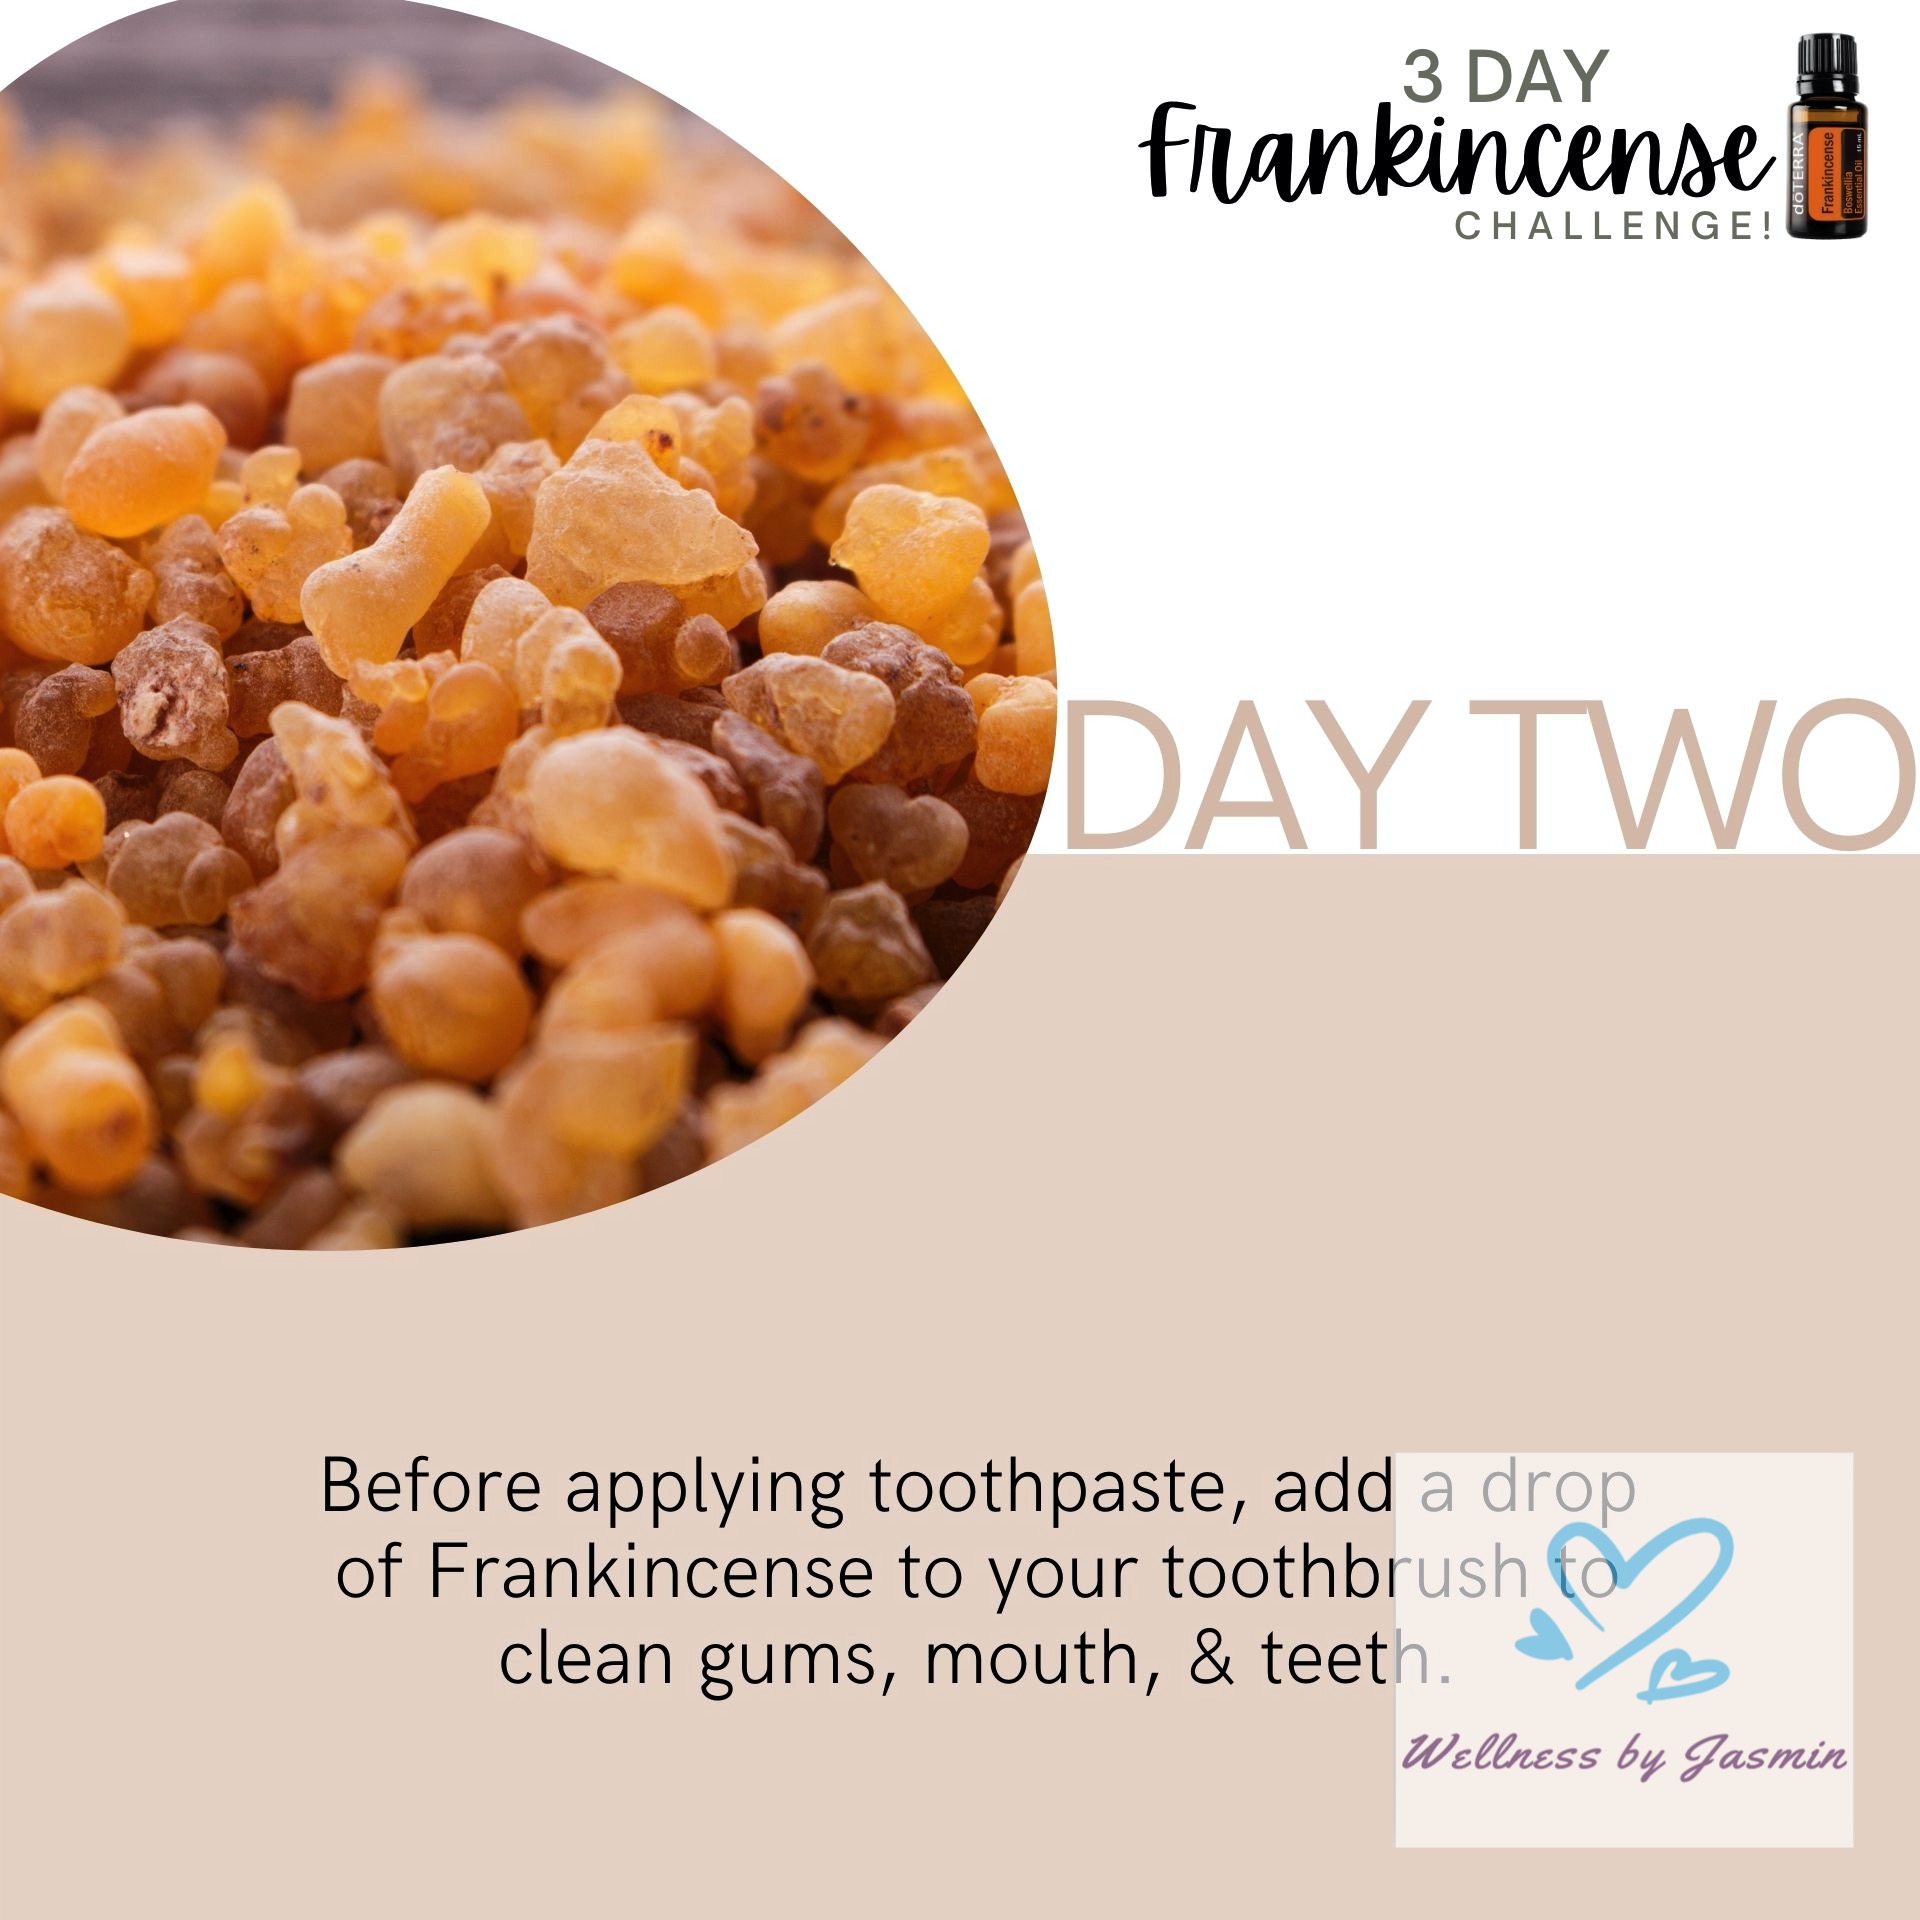 Read about Frankincense and Oral Health